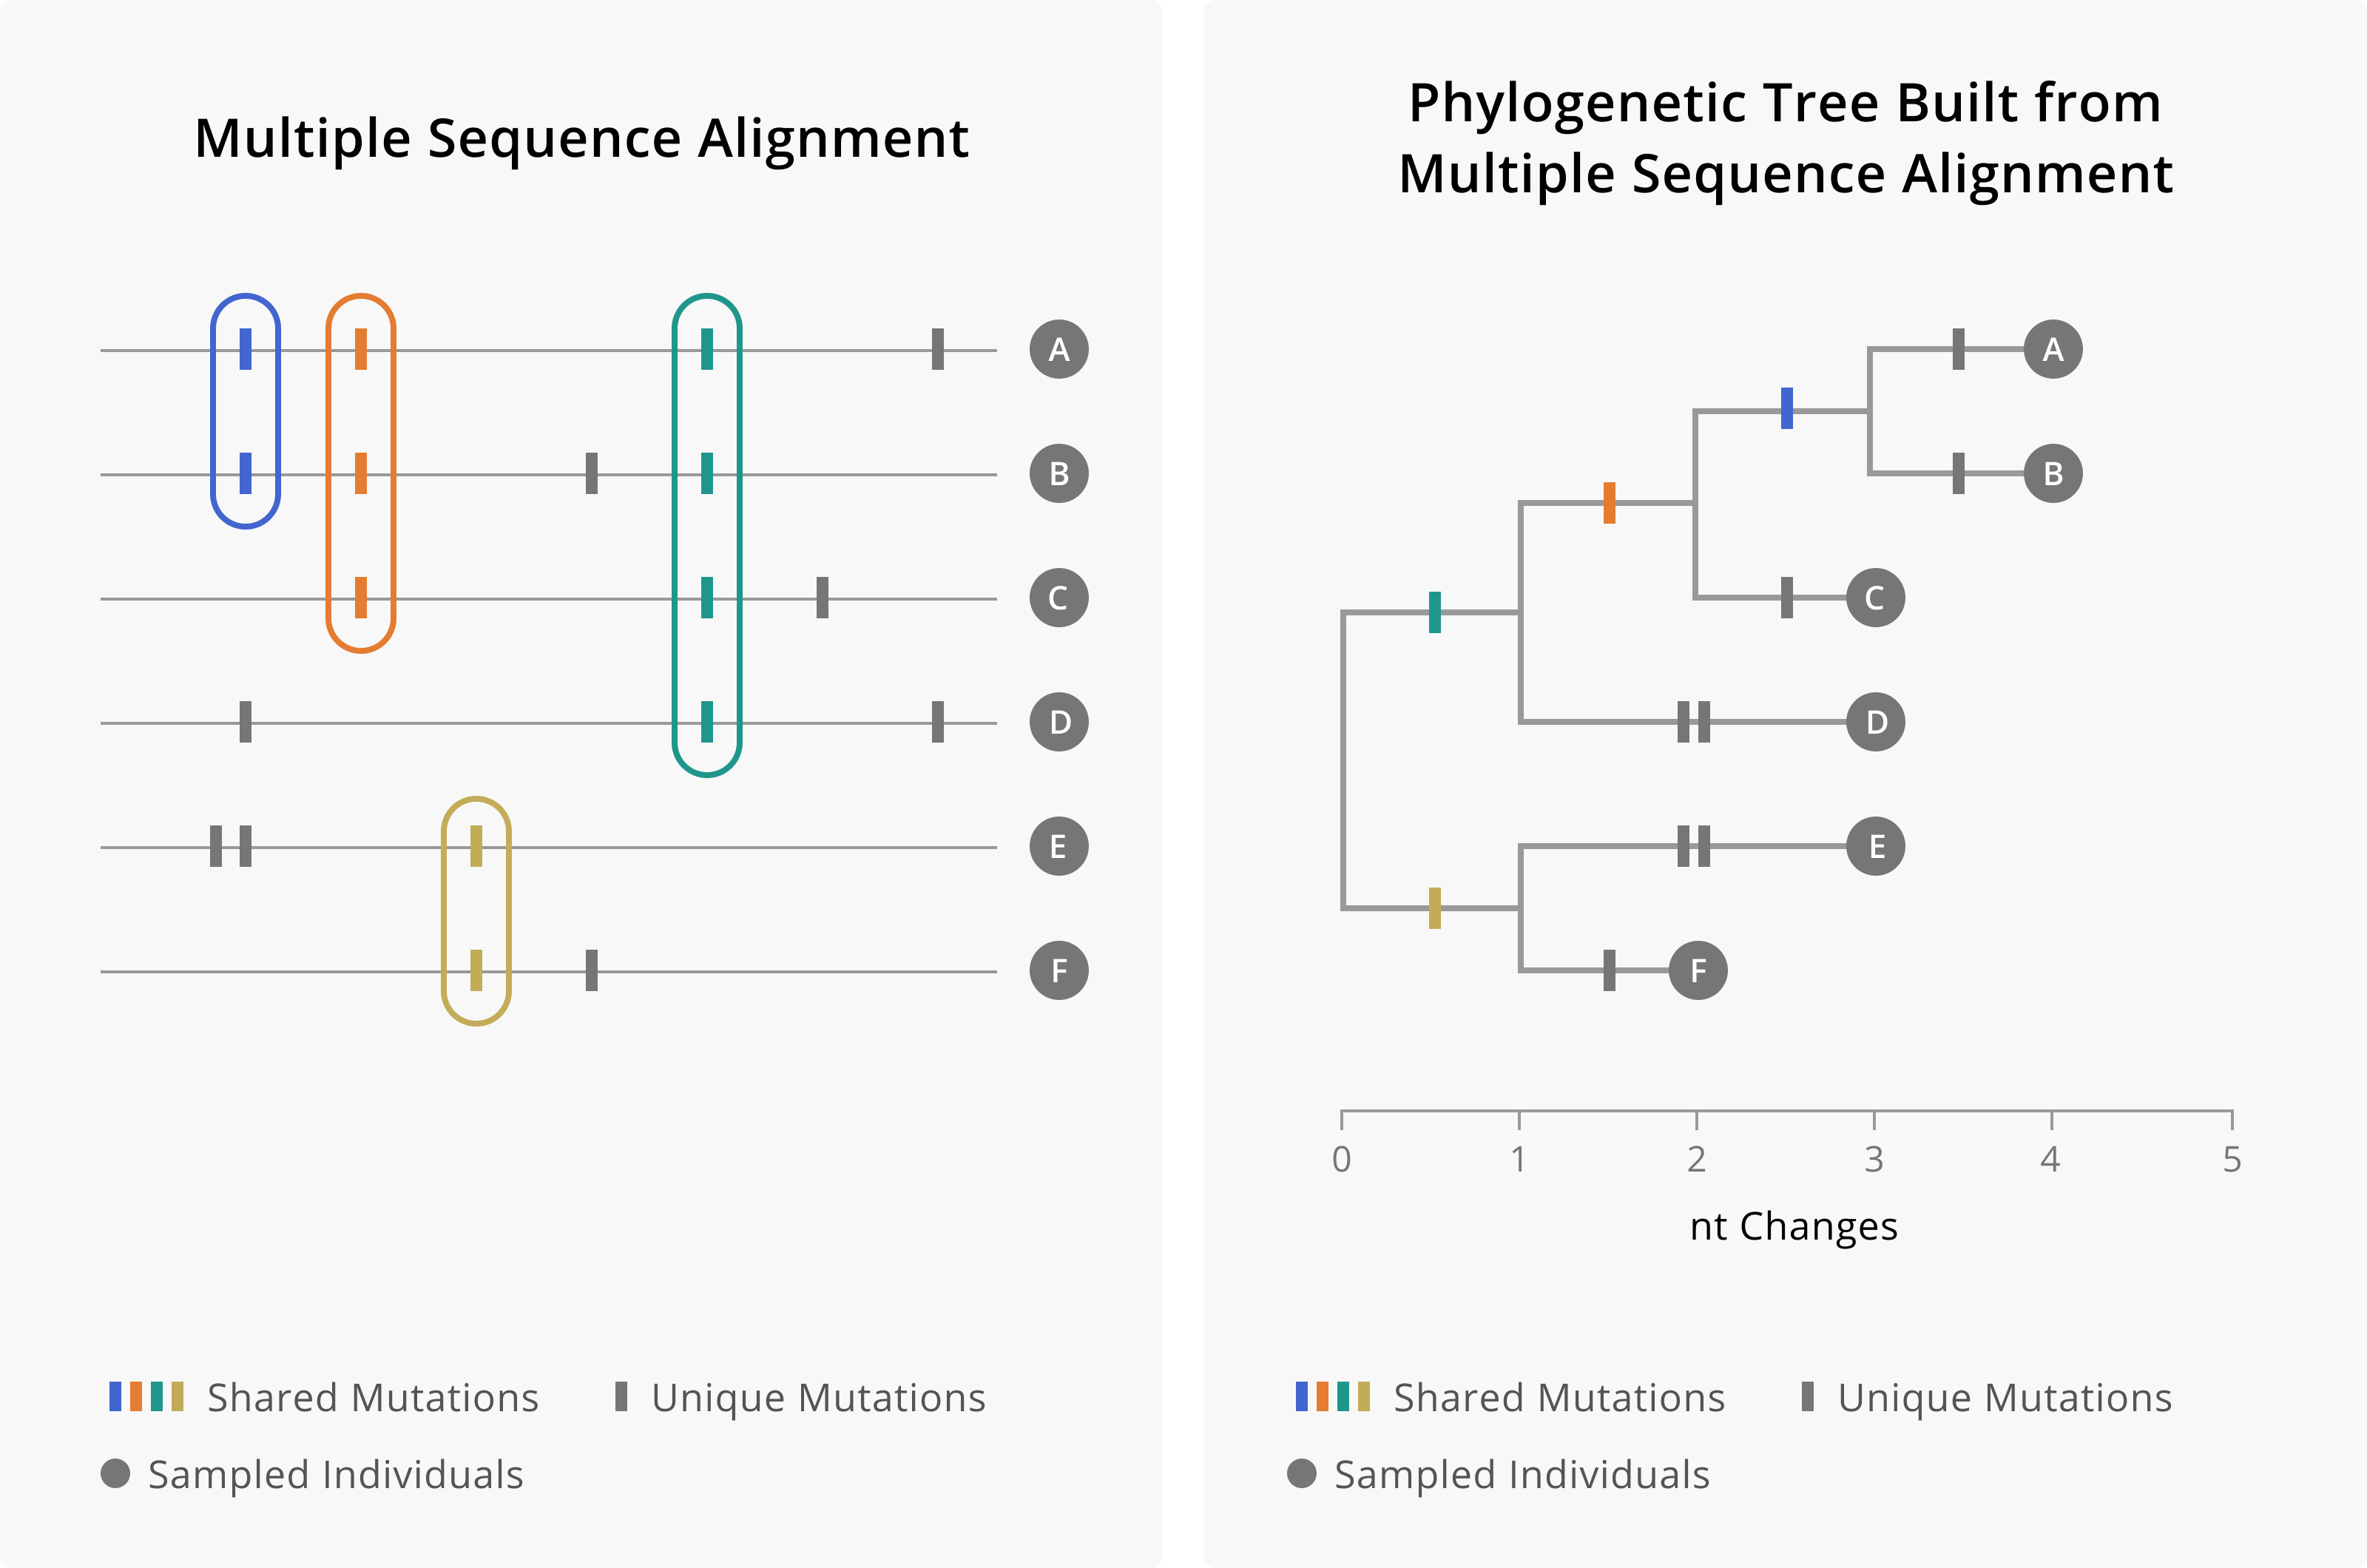 On the left is a theoretical multiple sequence alignment of genomes A through F. Shared mutations are found in multiple samples, while unique mutations are found only in one sampled sequence. We use this pattern of shared and unique mutations to build the phylogenetic tree, which hierarchically clusters tips according to which mutations they share. Mutations occur along branches, such that tips that descend from a branch will share that mutation. When mutations are shared by more samples, then those mutations would have occurred more deeply in the tree. Mutations that are unique to samples occur on external branches, whose only descendent is the sampled tip.